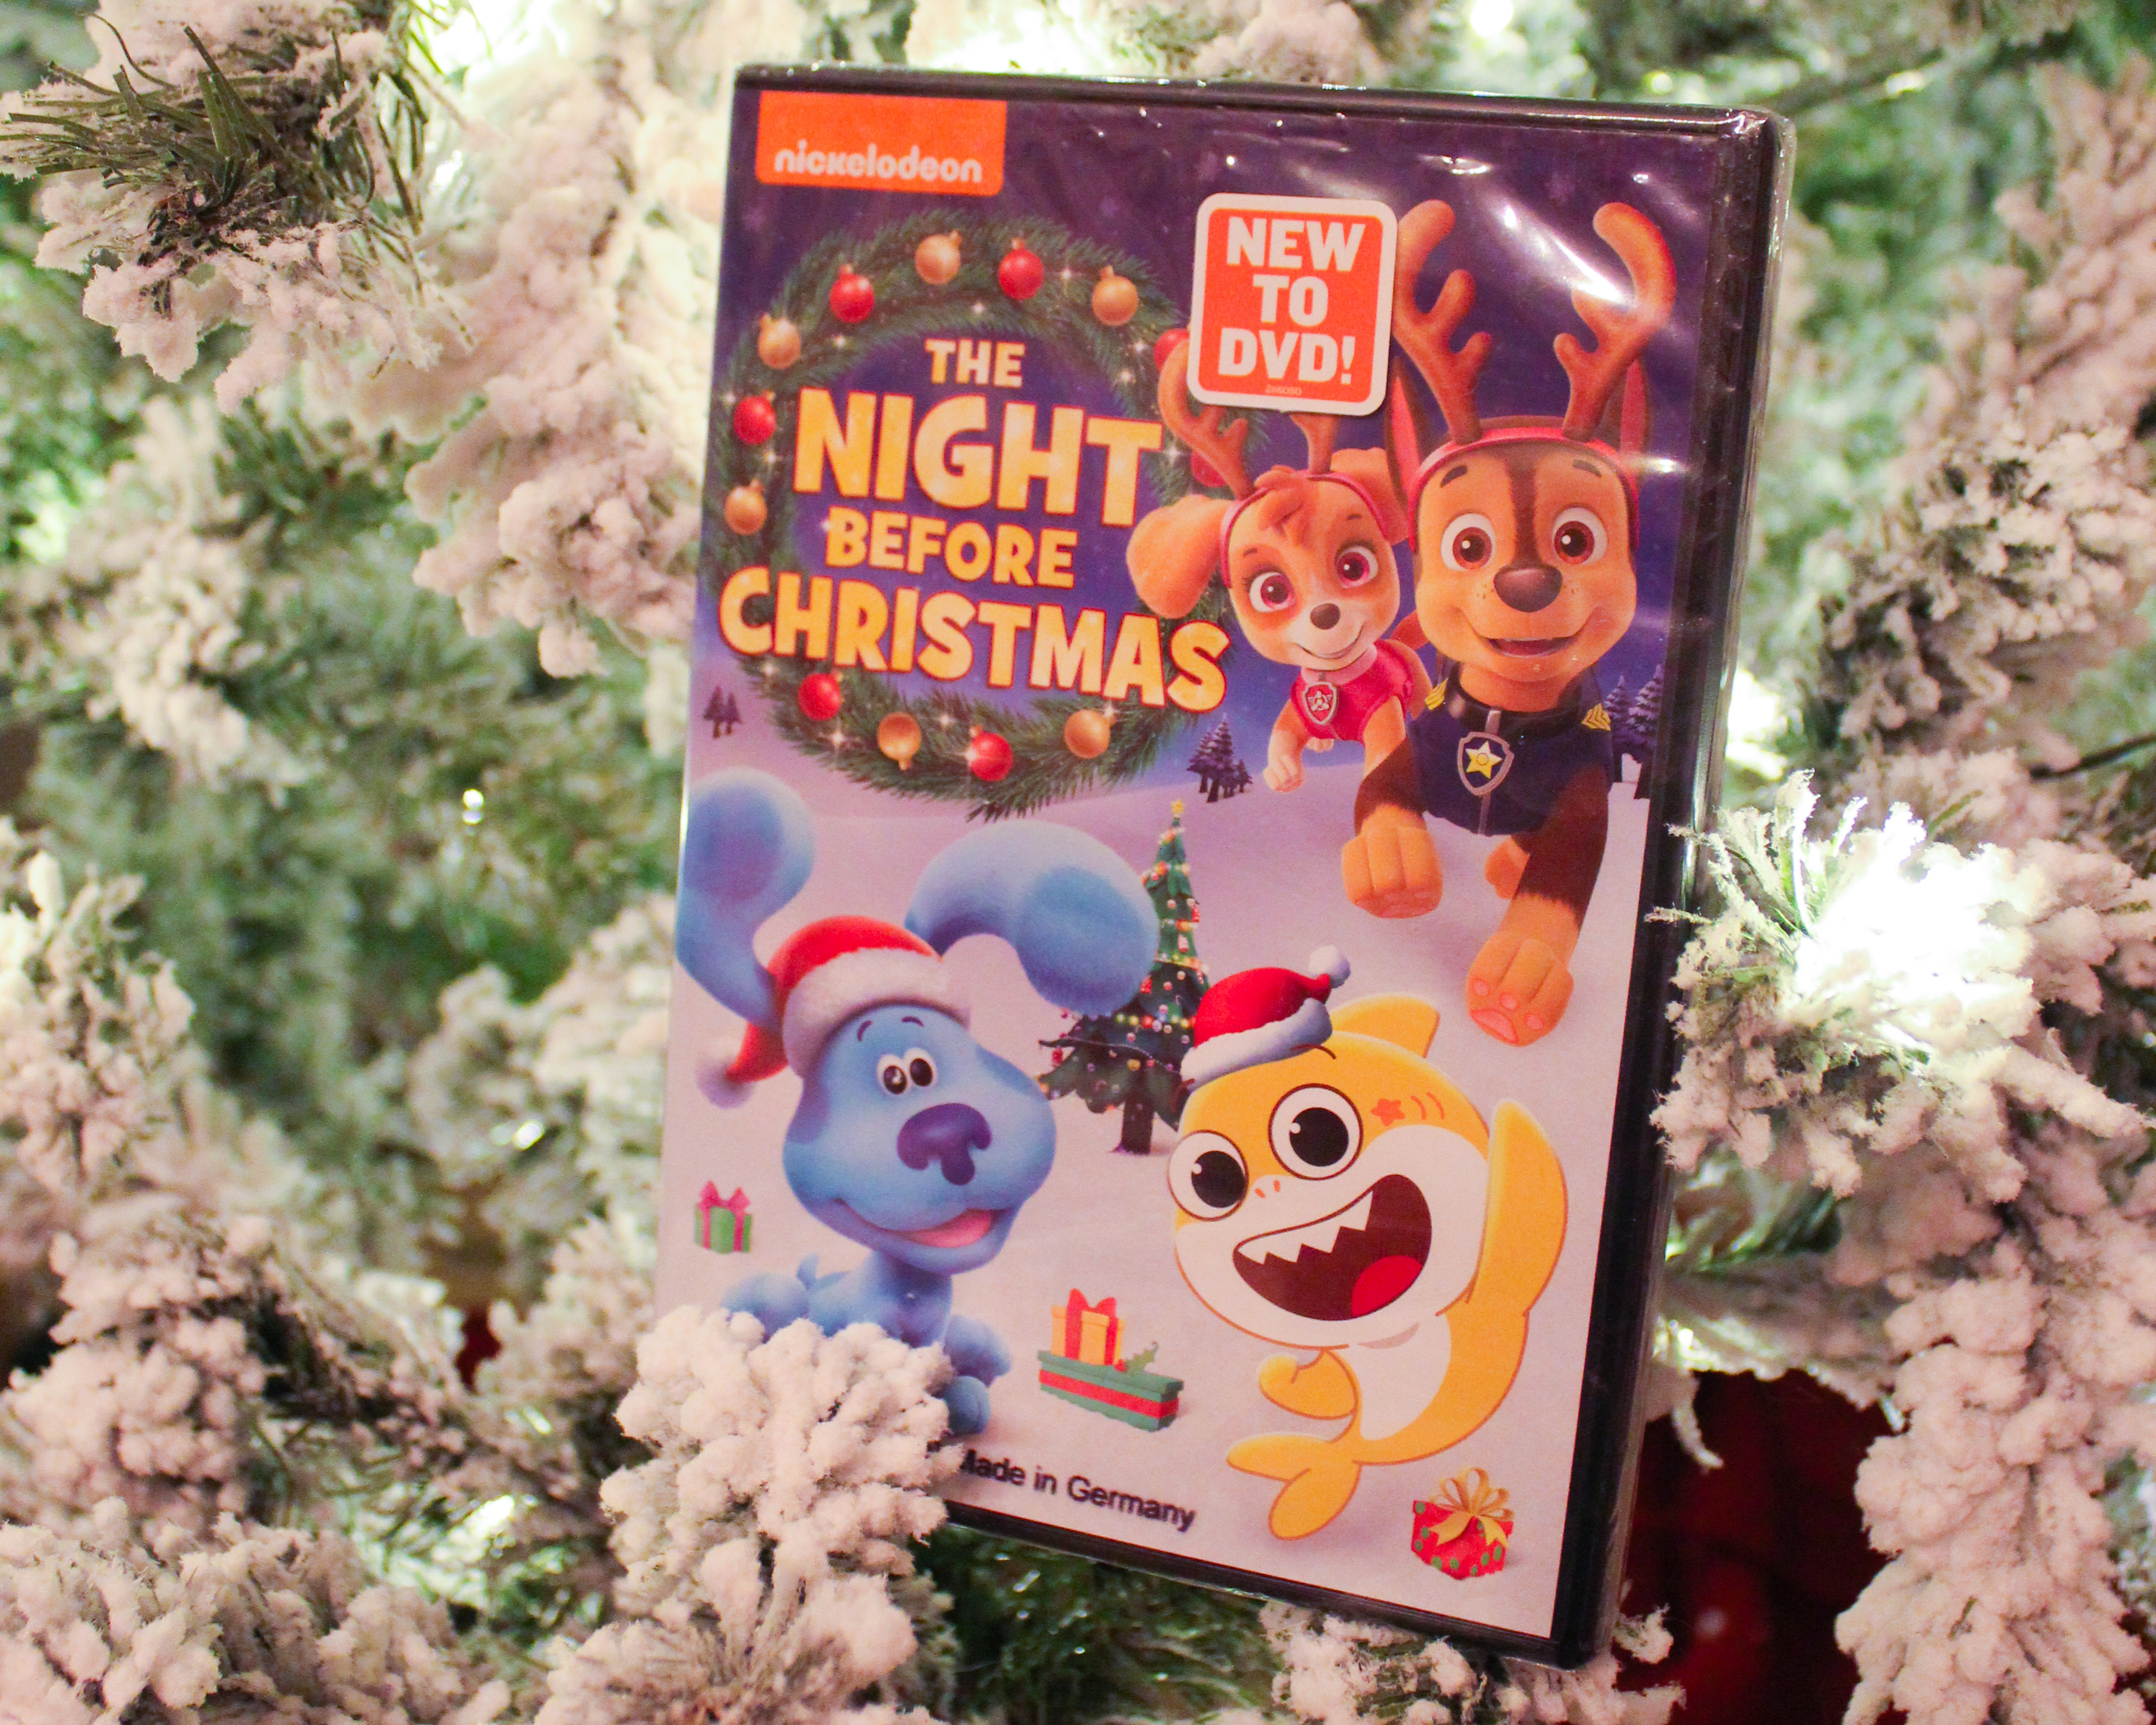 Nickelodeon Nick Jr.: The Night Before Christmas special DVD featuring new episodes of Paw Patrol, Blues Clues and You! and Baby Shark